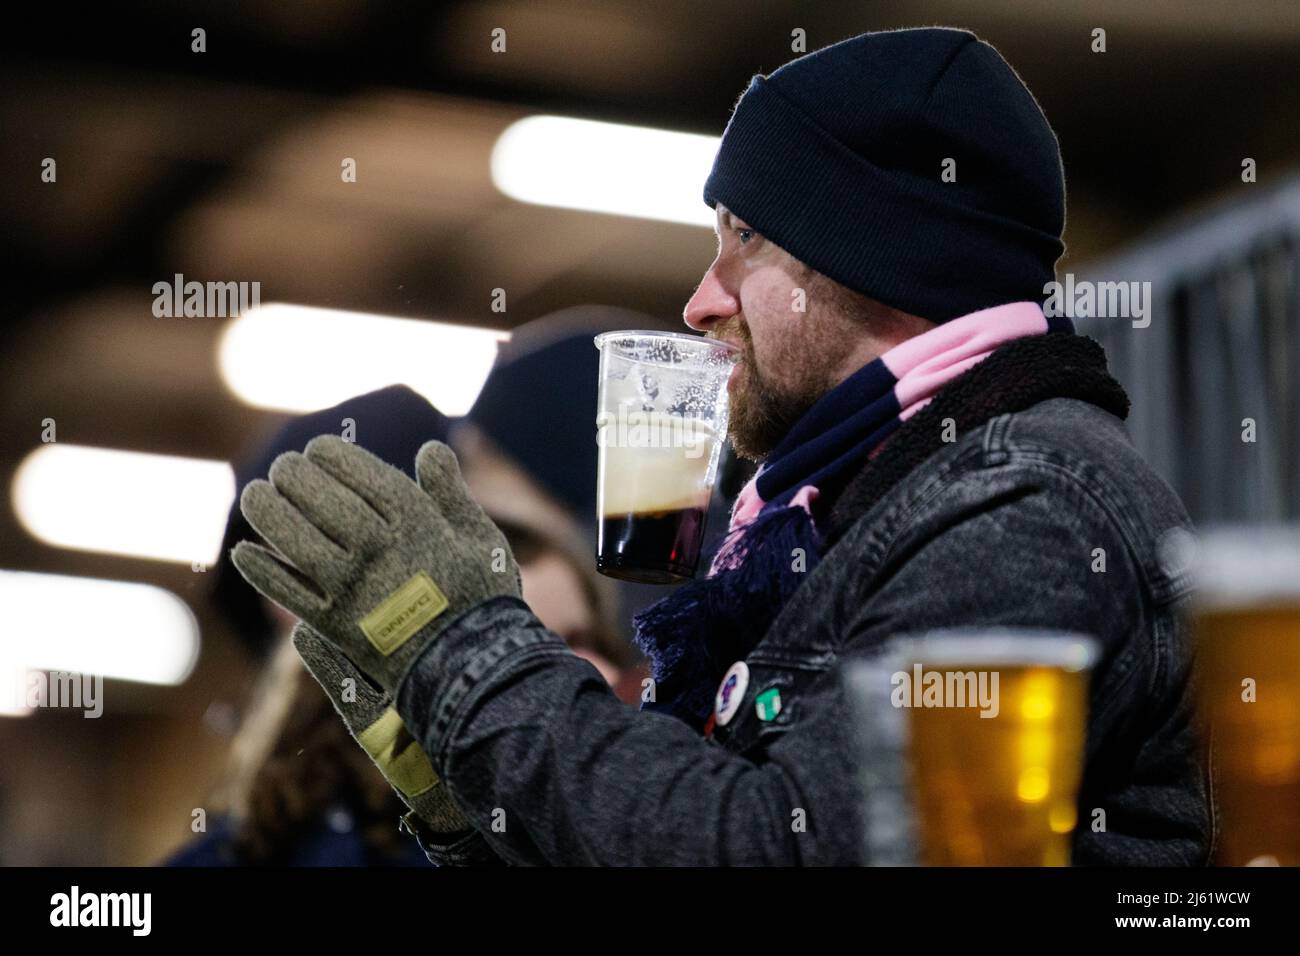 Man applauding at a football match holding a beer in his mouth. Stock Photo